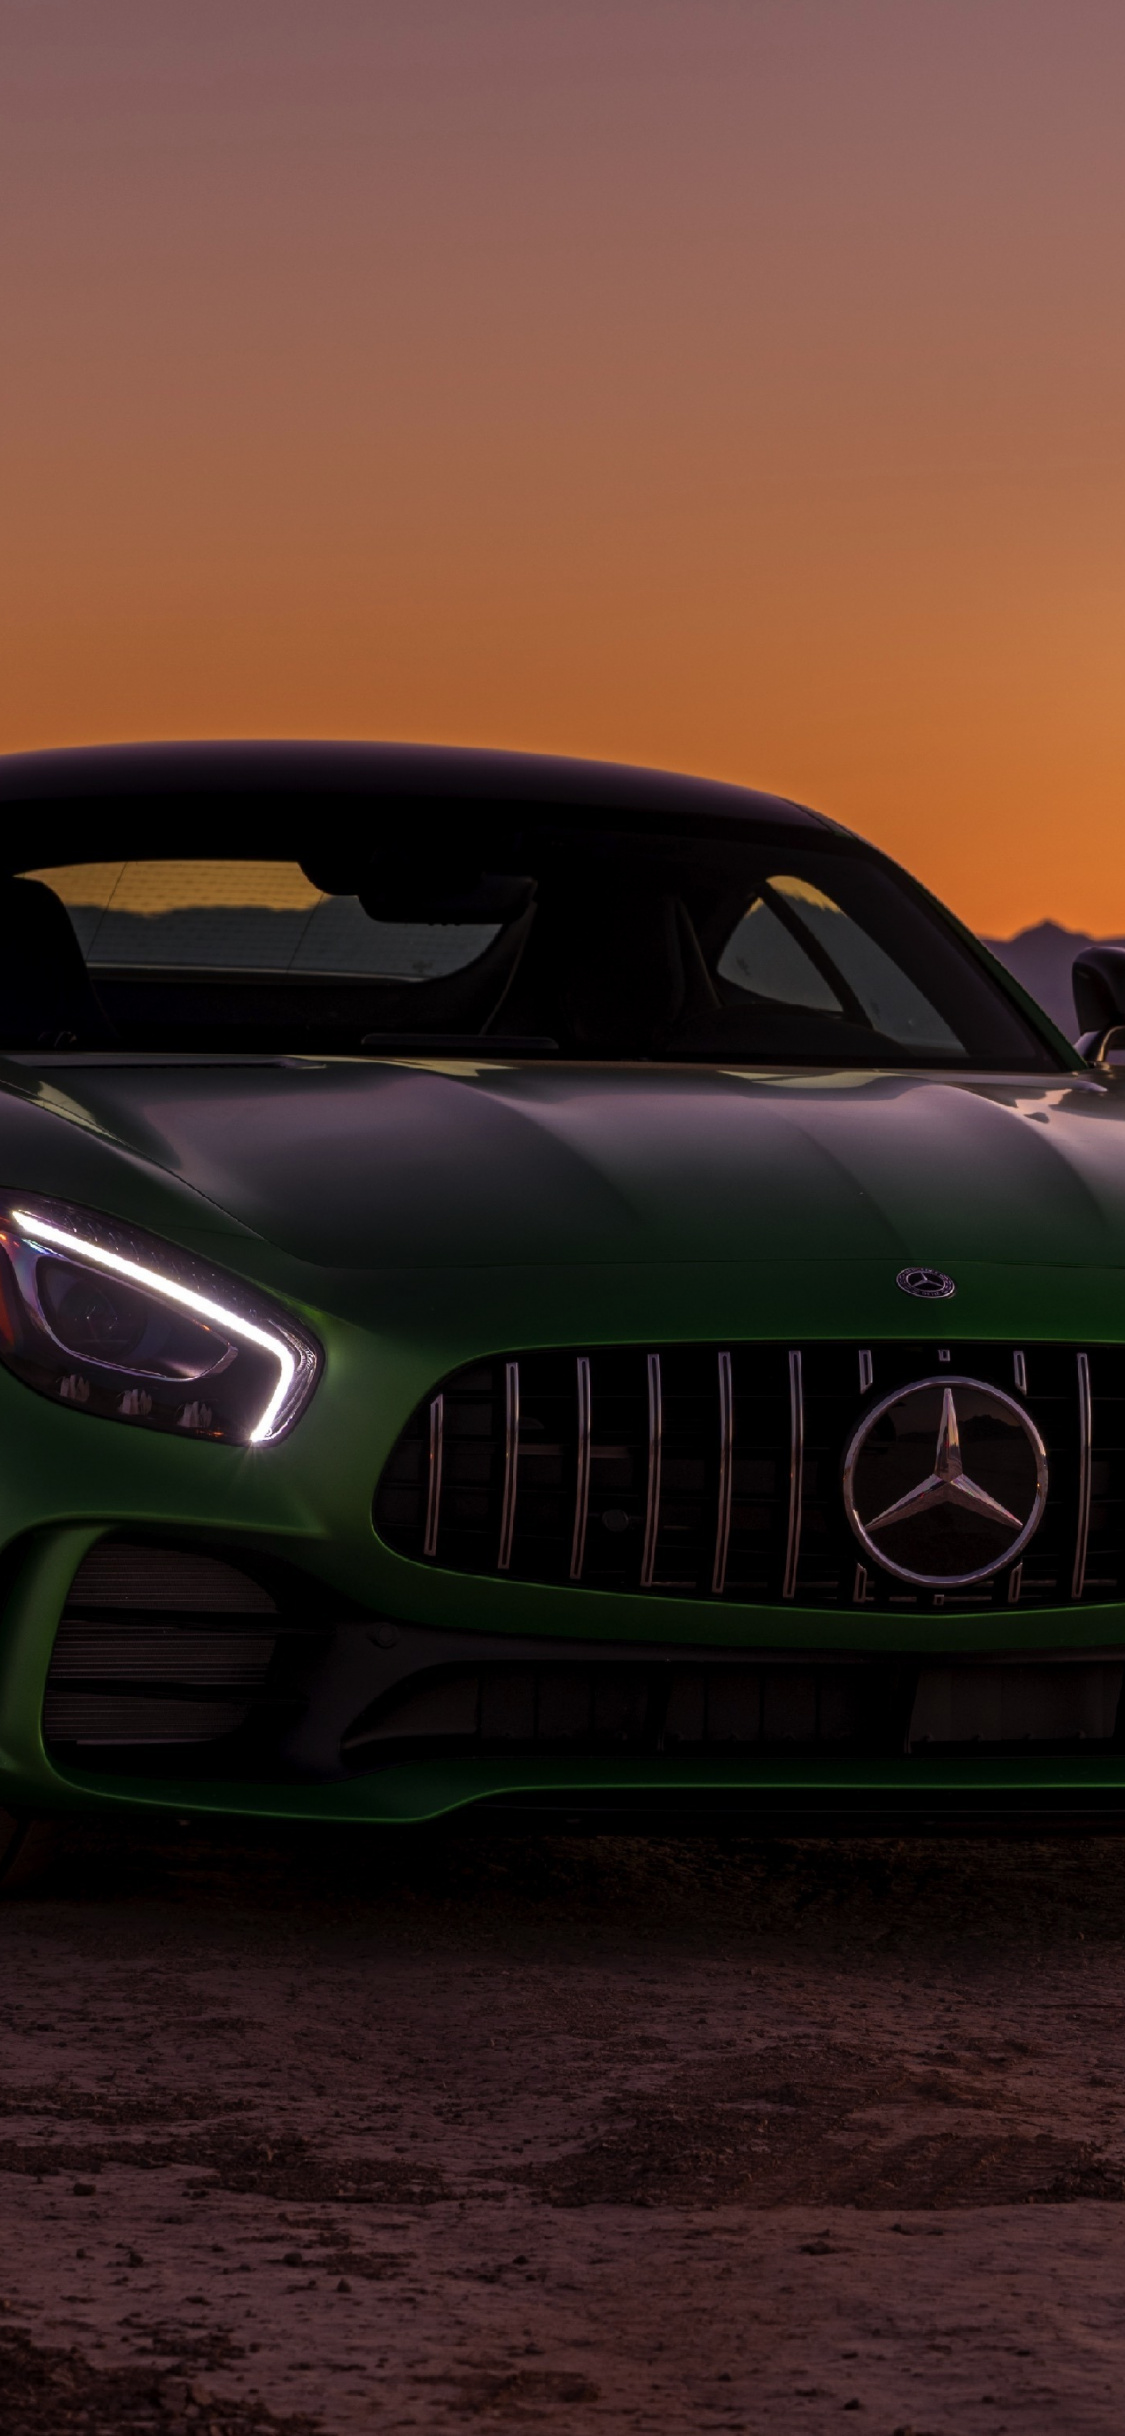 The Mercedes-amg Gt R, Sports Car, Front, Wallpaper - Iphone X Mercedes Amg - HD Wallpaper 